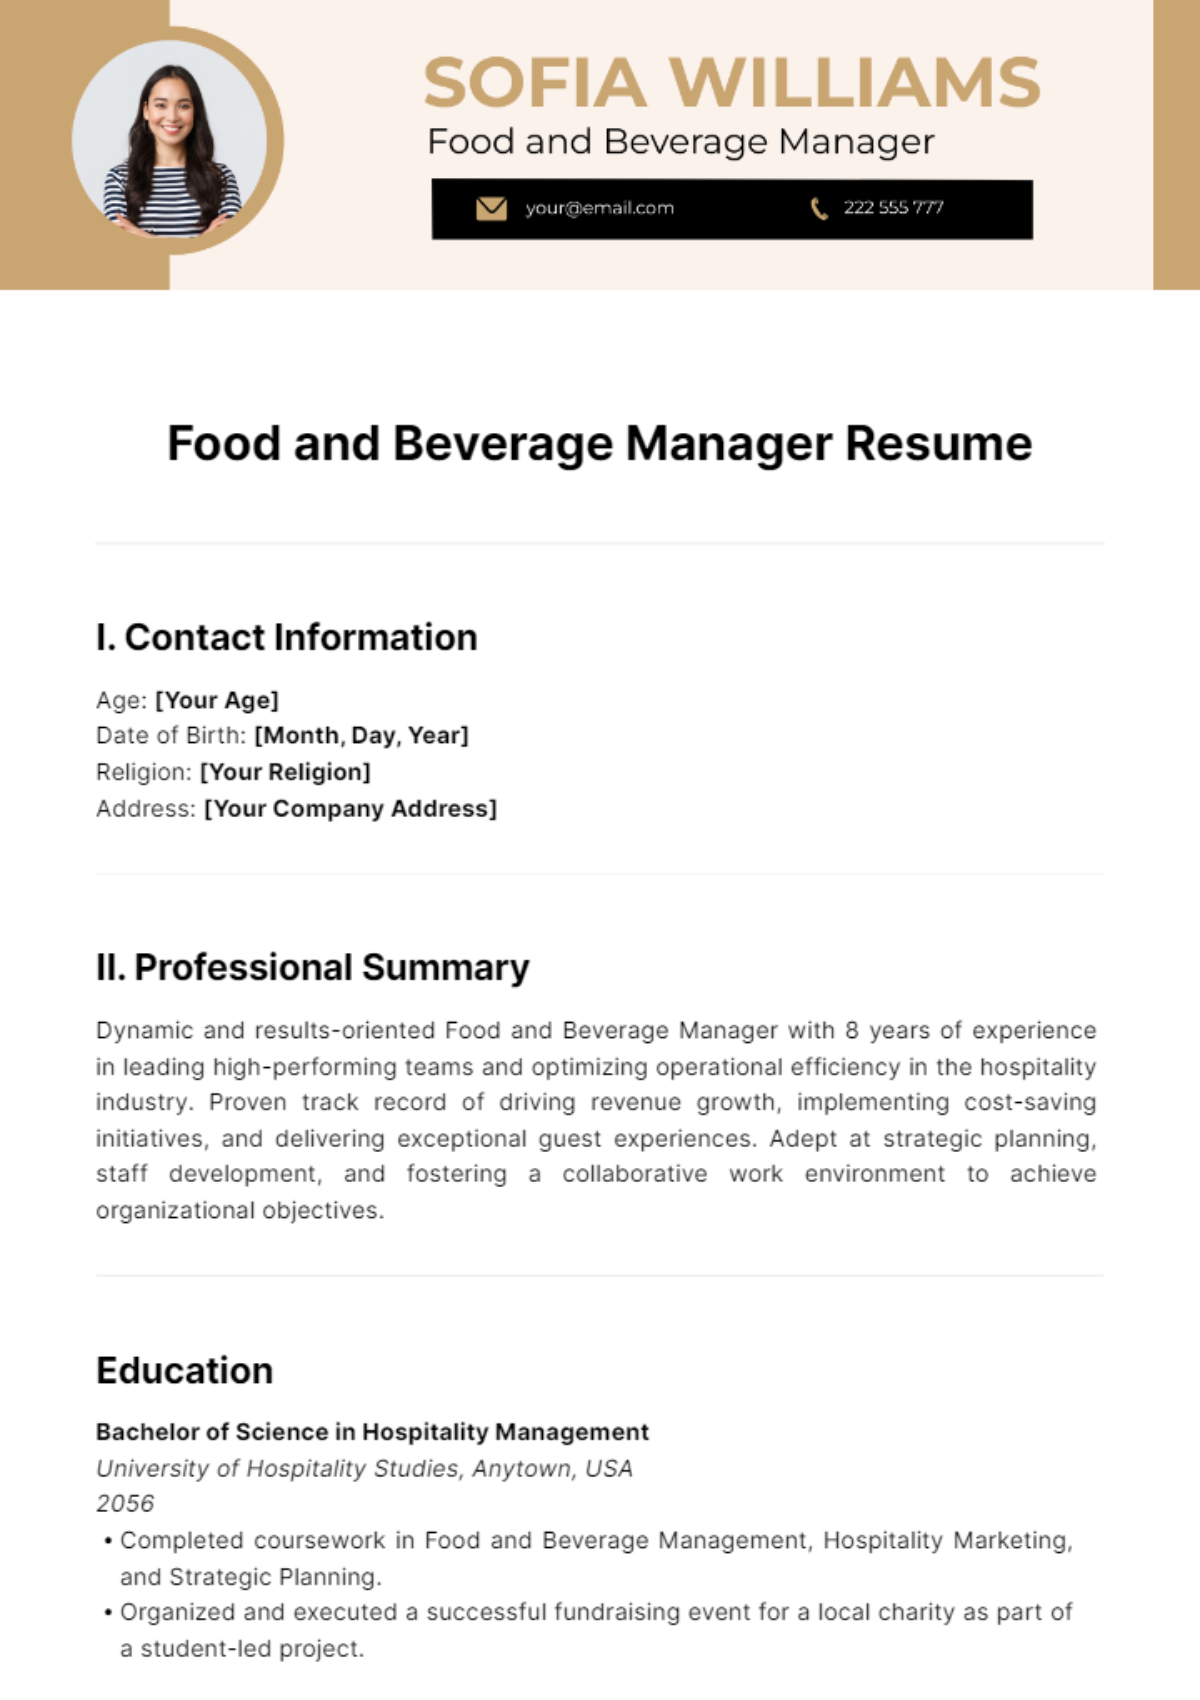 Food and Beverage Manager Resume Template